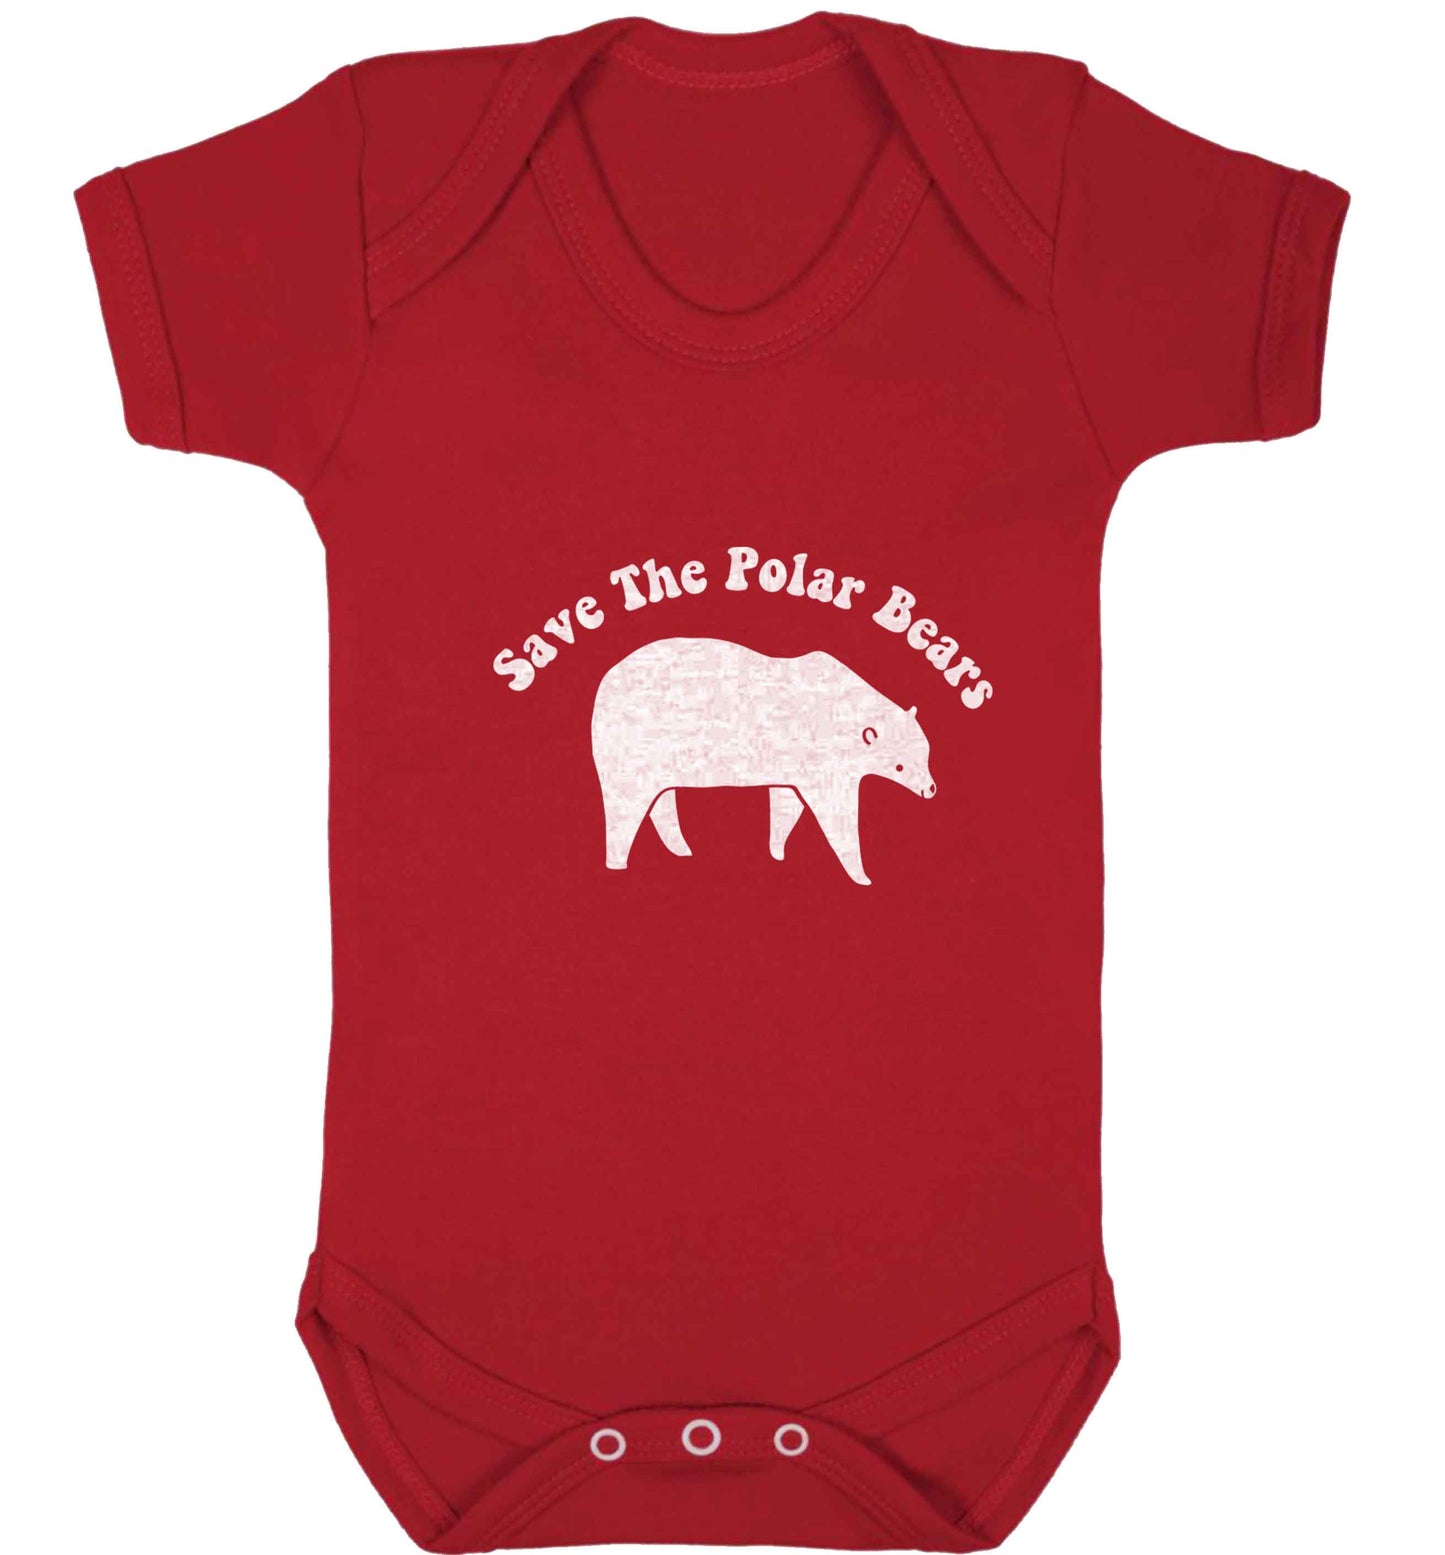 Save The Polar Bears baby vest red 18-24 months